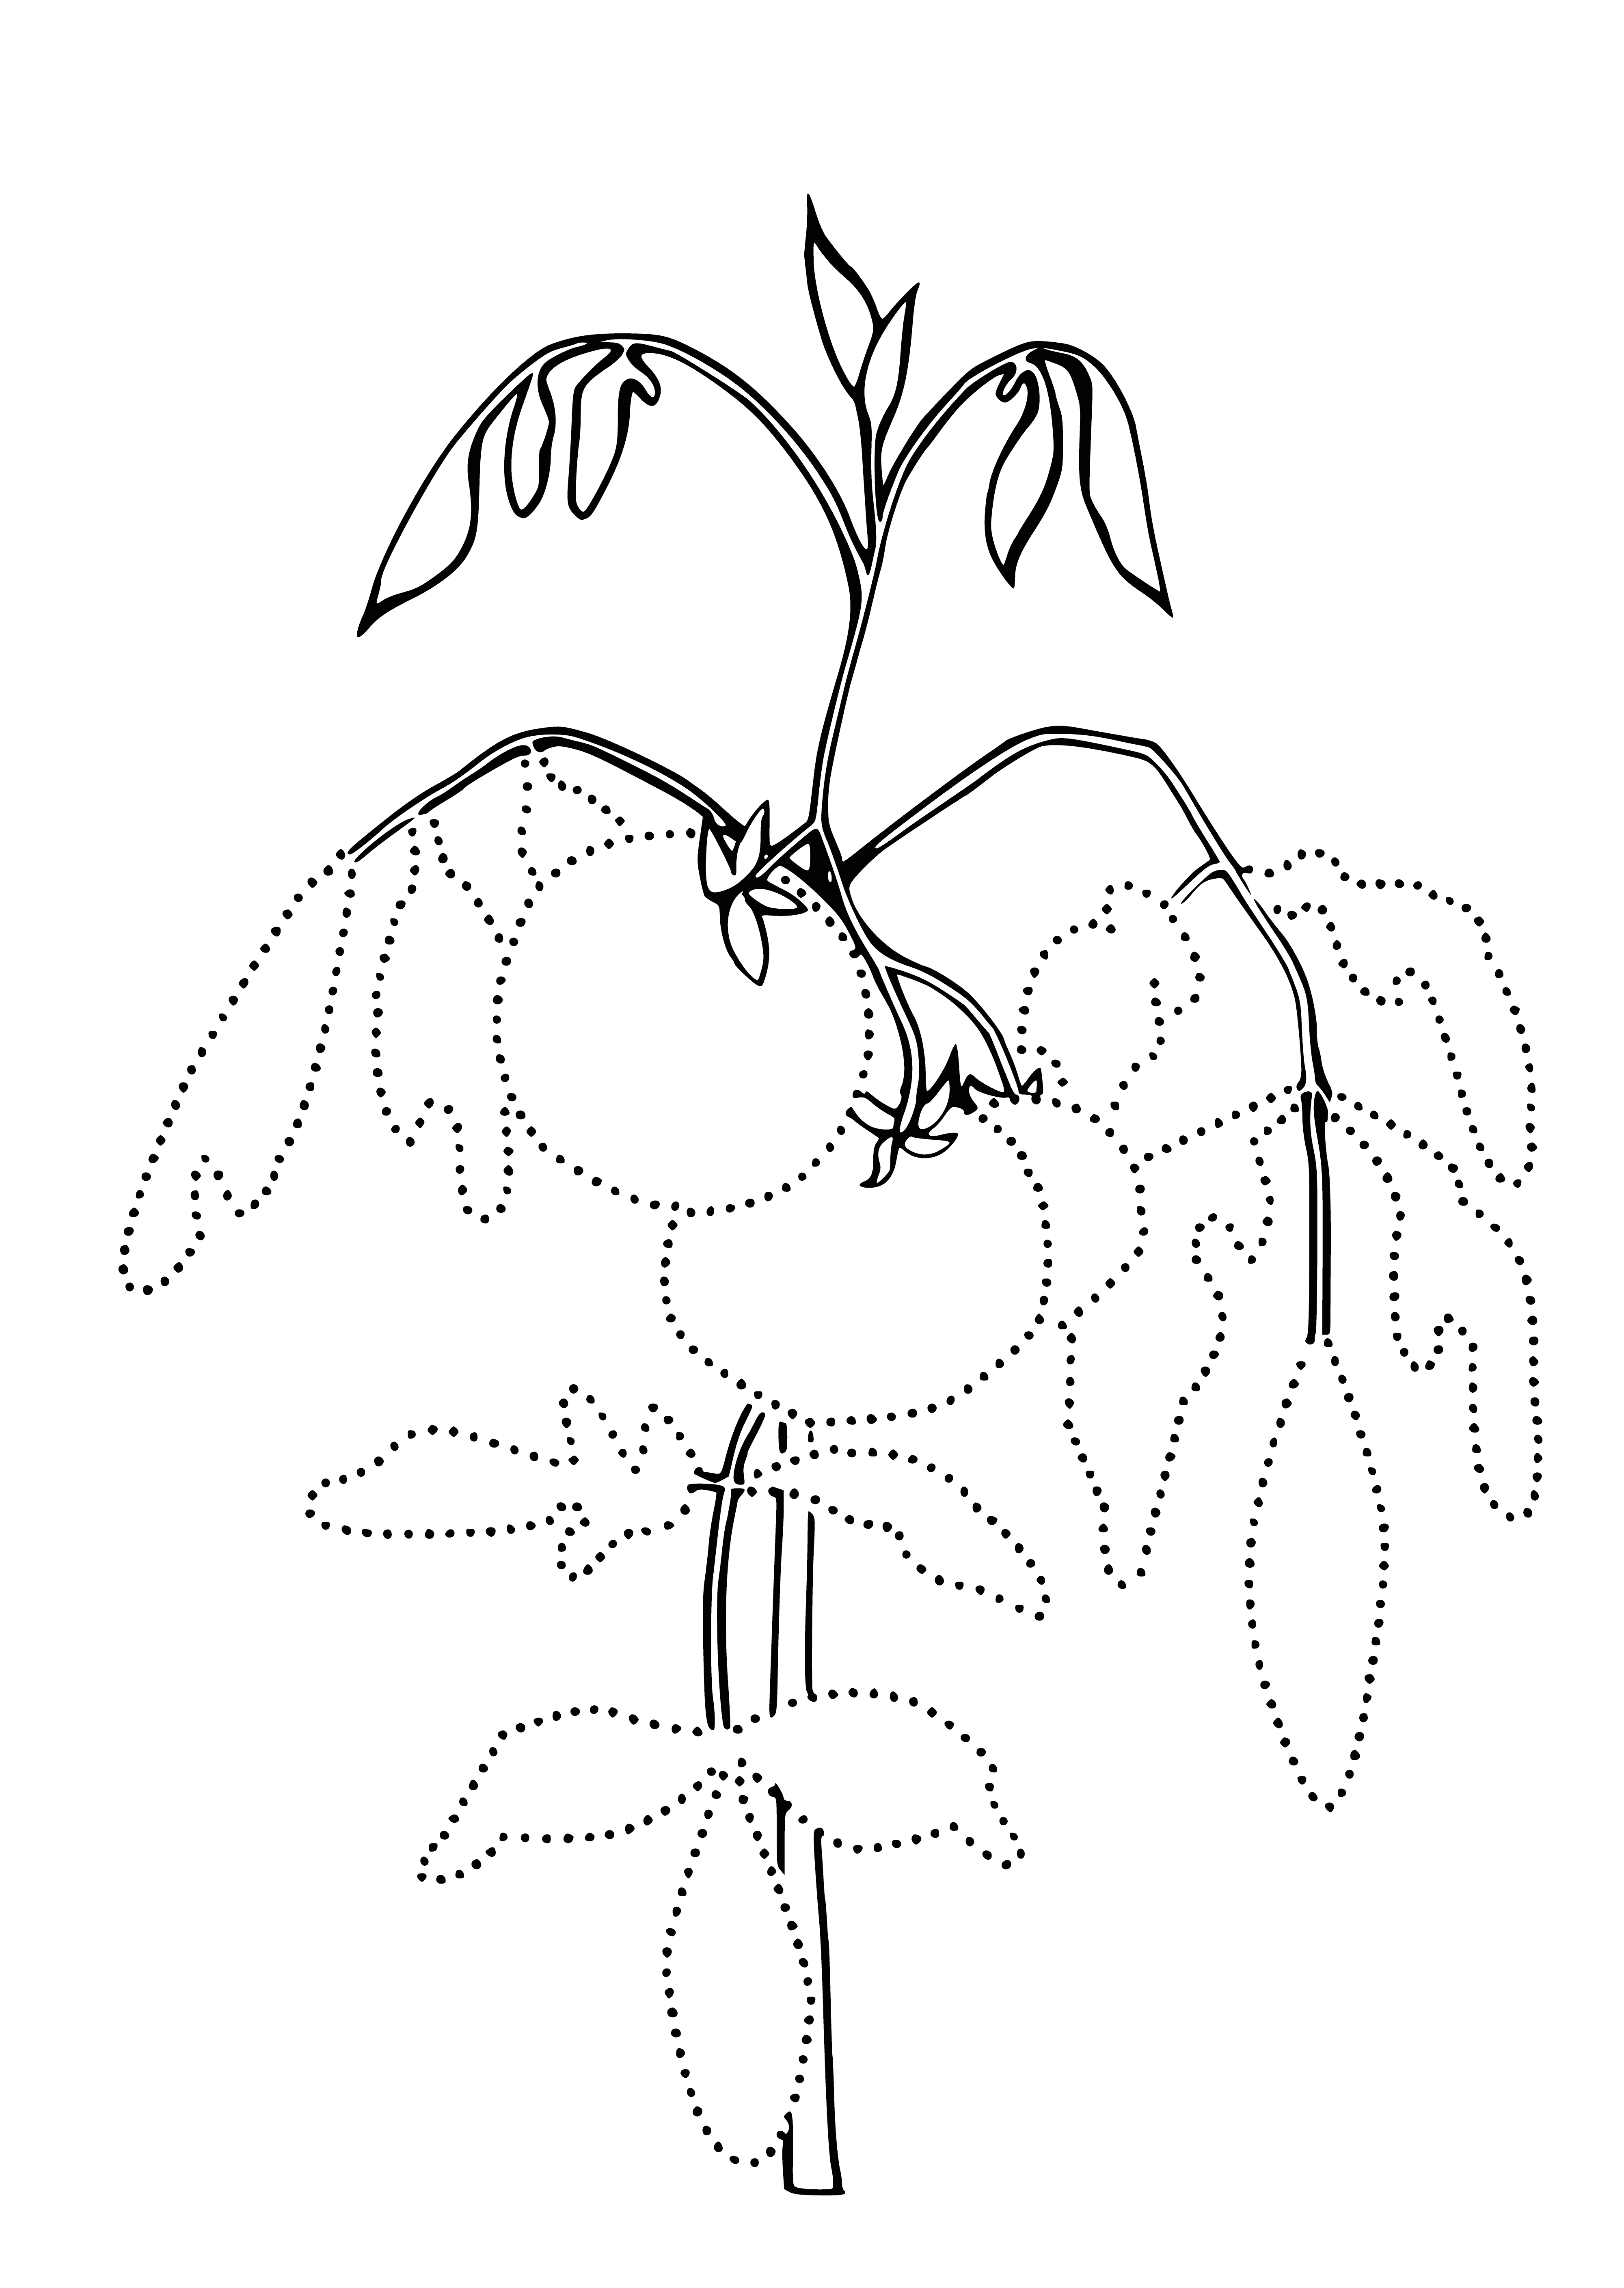 coloring page: The tomato is a red/yellow/green/purple, bumpy-skinned fruit w/ a thin green calyx, a stem at its top & seeds inside. It has an umbilicus on the bottom. #fruit